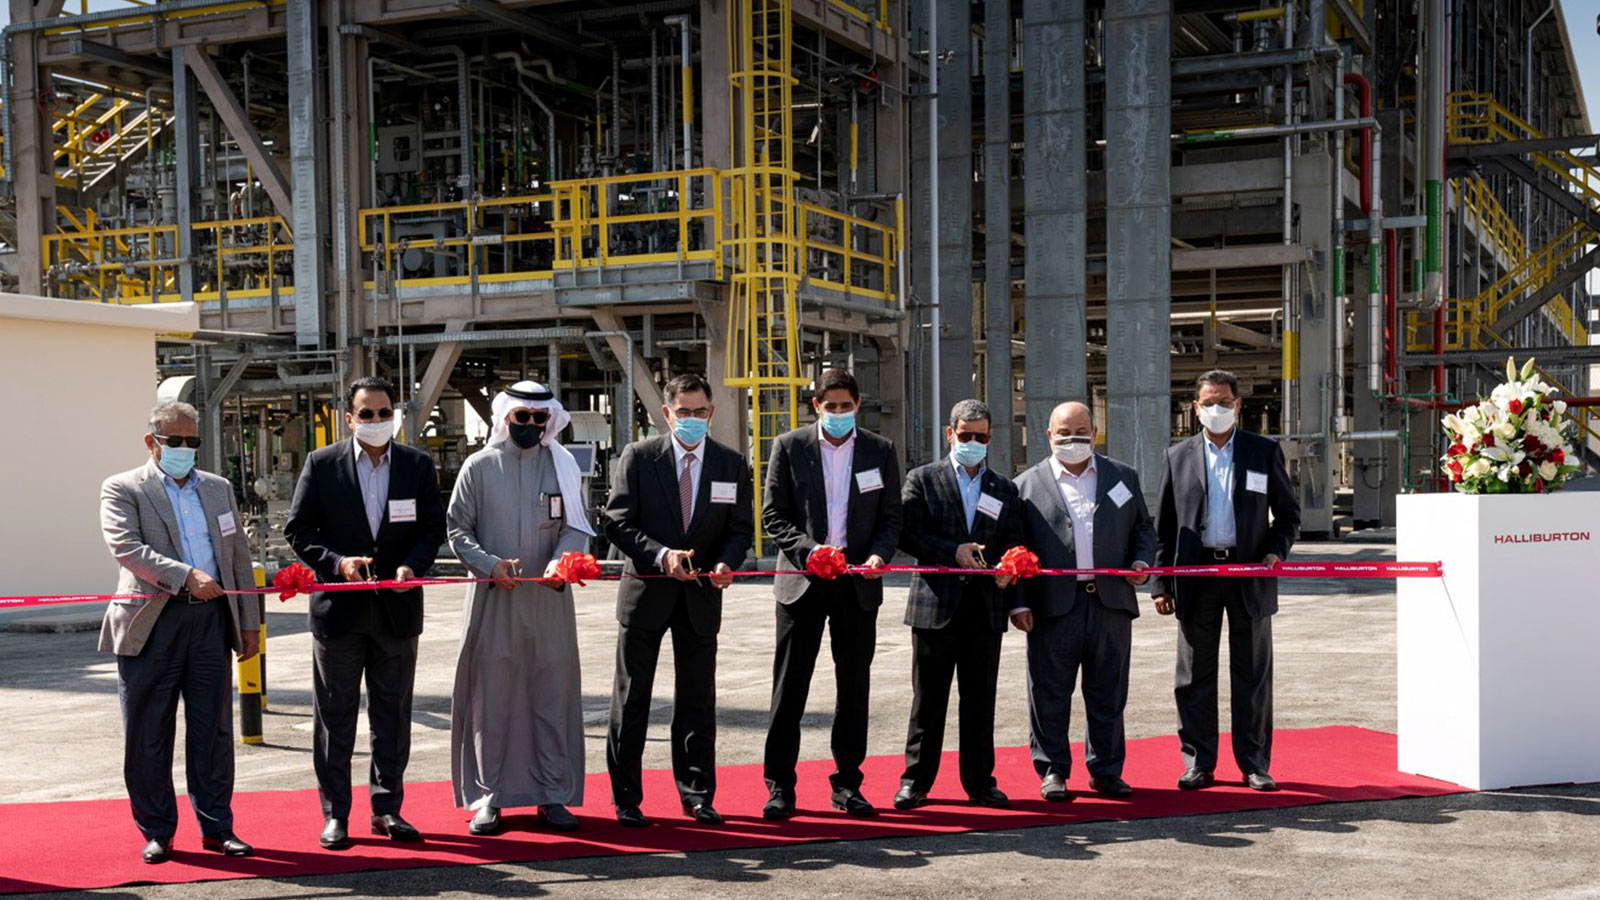 Halliburton formally opens its chemical reaction plant with a ribbon cutting